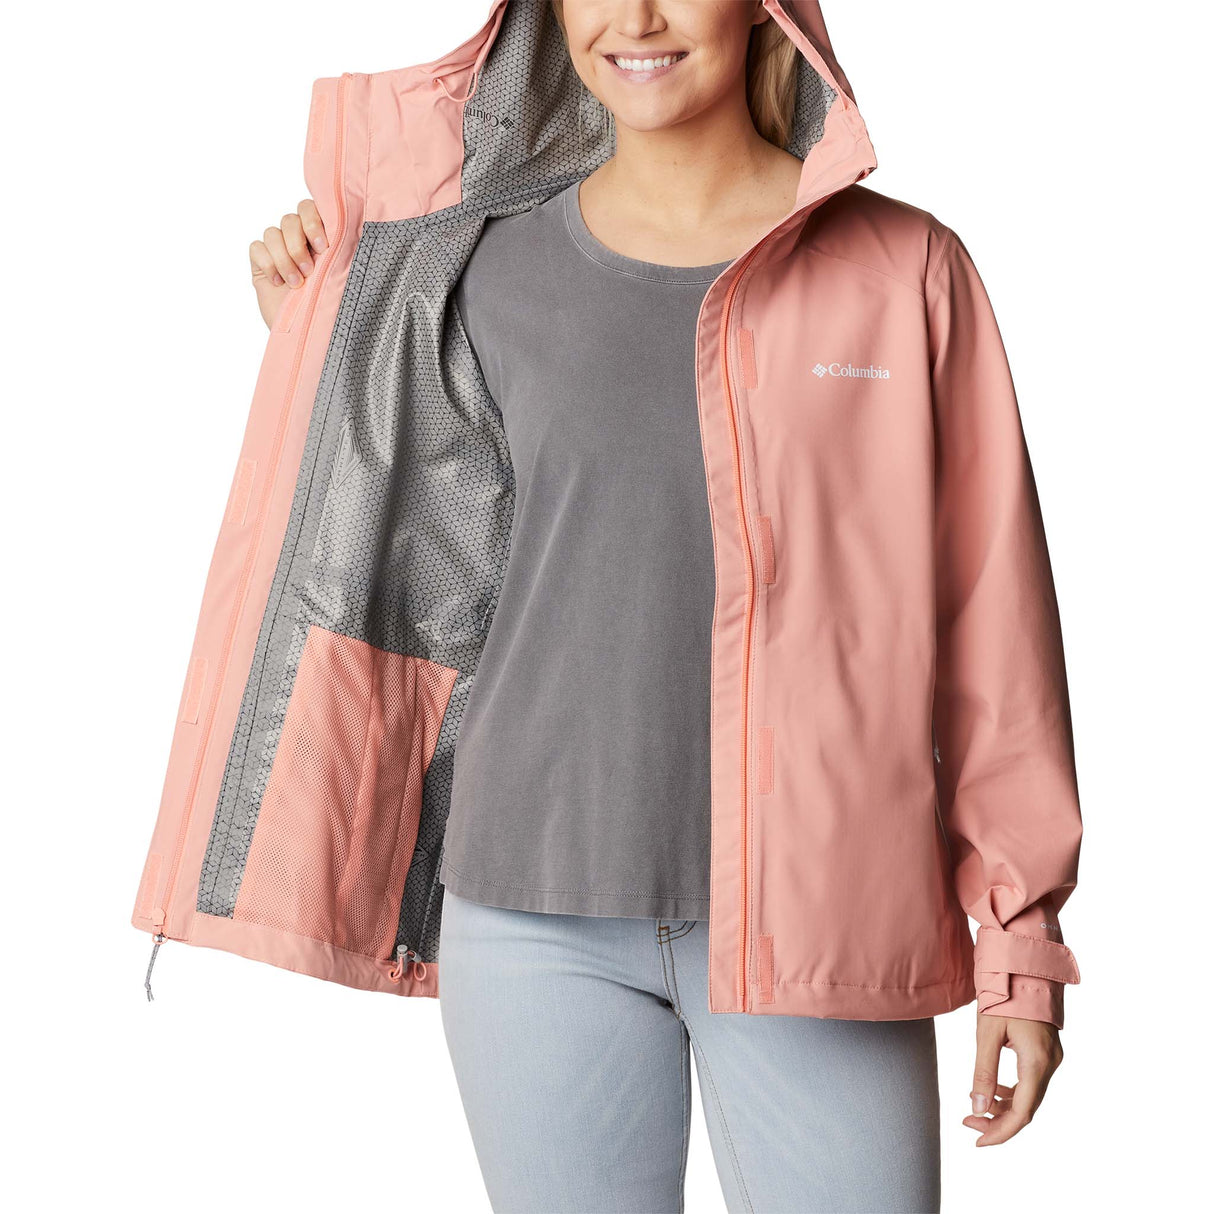 Columbia Earth Explorer Shell manteau coquille coral reef femme poche interne